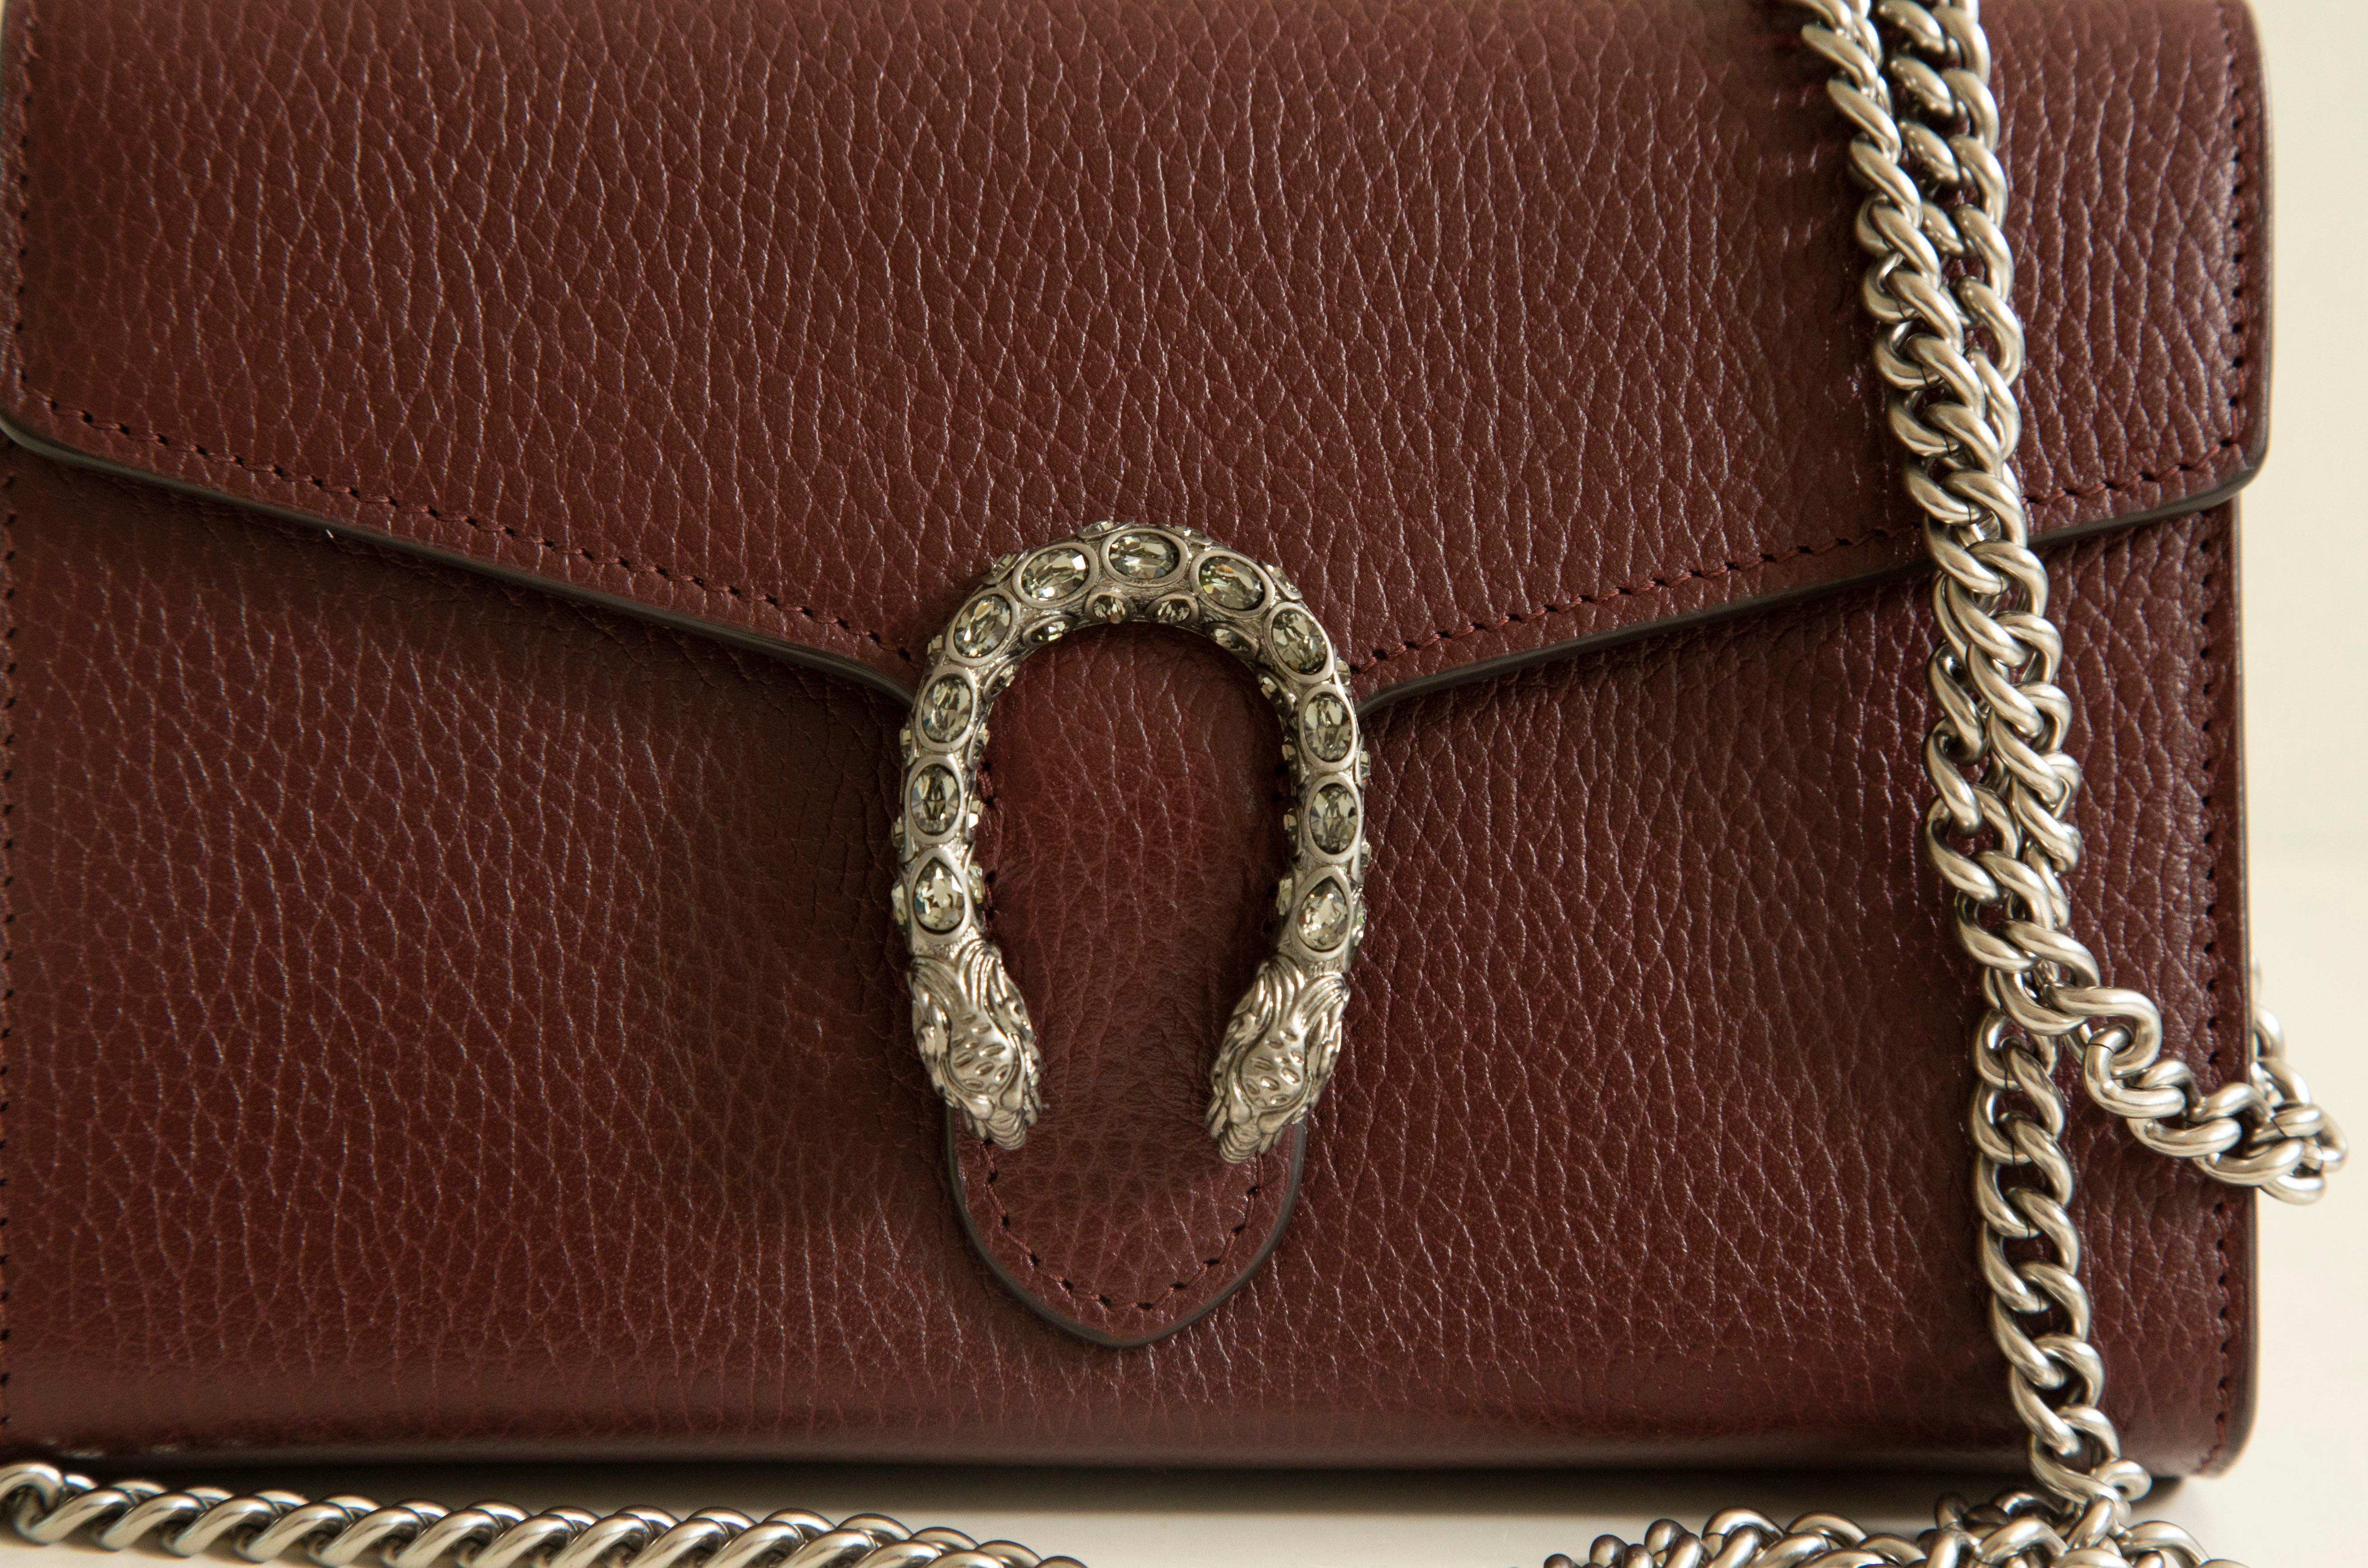 The Gucci Dionysus leather mini chain bag made of burgundy leather with 
old silver toned hardware. The bag features a  tiger head spur closure-a unique detail referencing the Greek god Dionysus, who in myth is said to have crossed the river Tigris